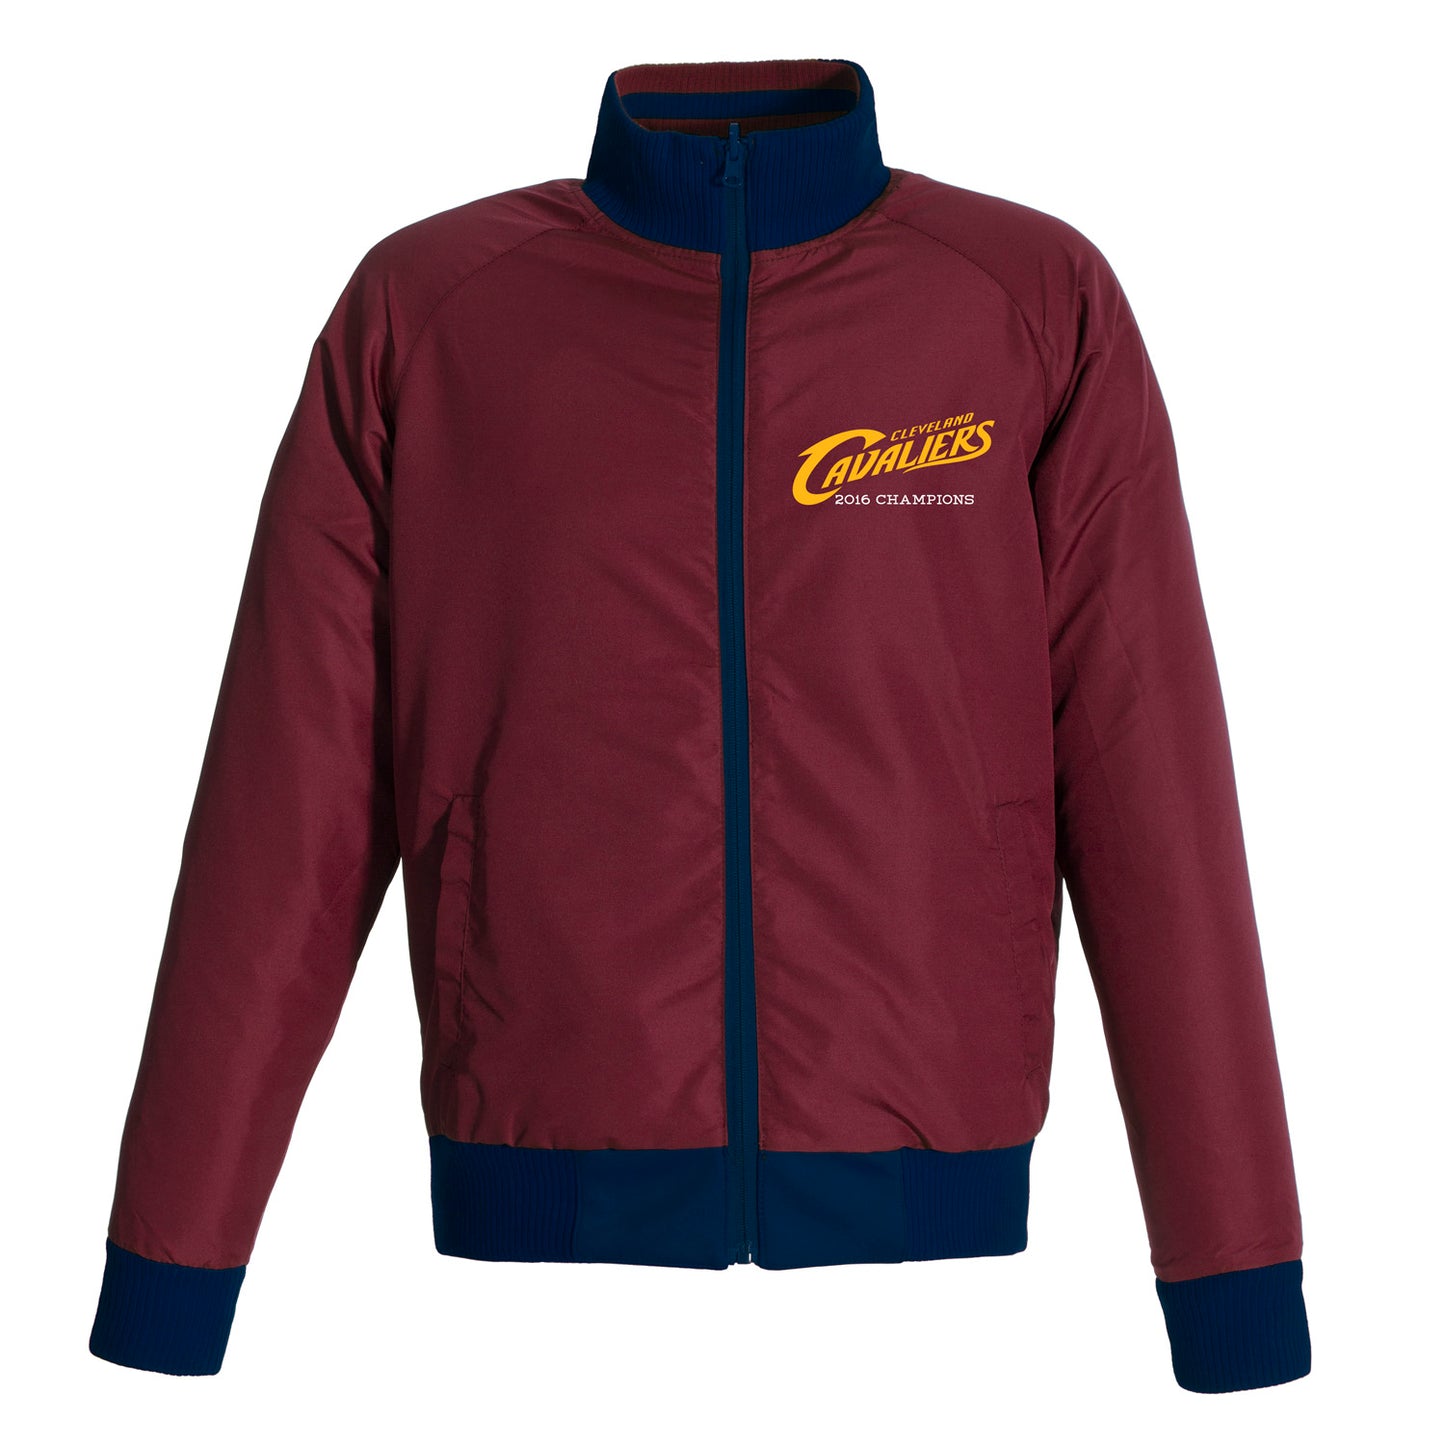 Cleveland Cavaliers Kid's 2016 Championship Polyester Jacket